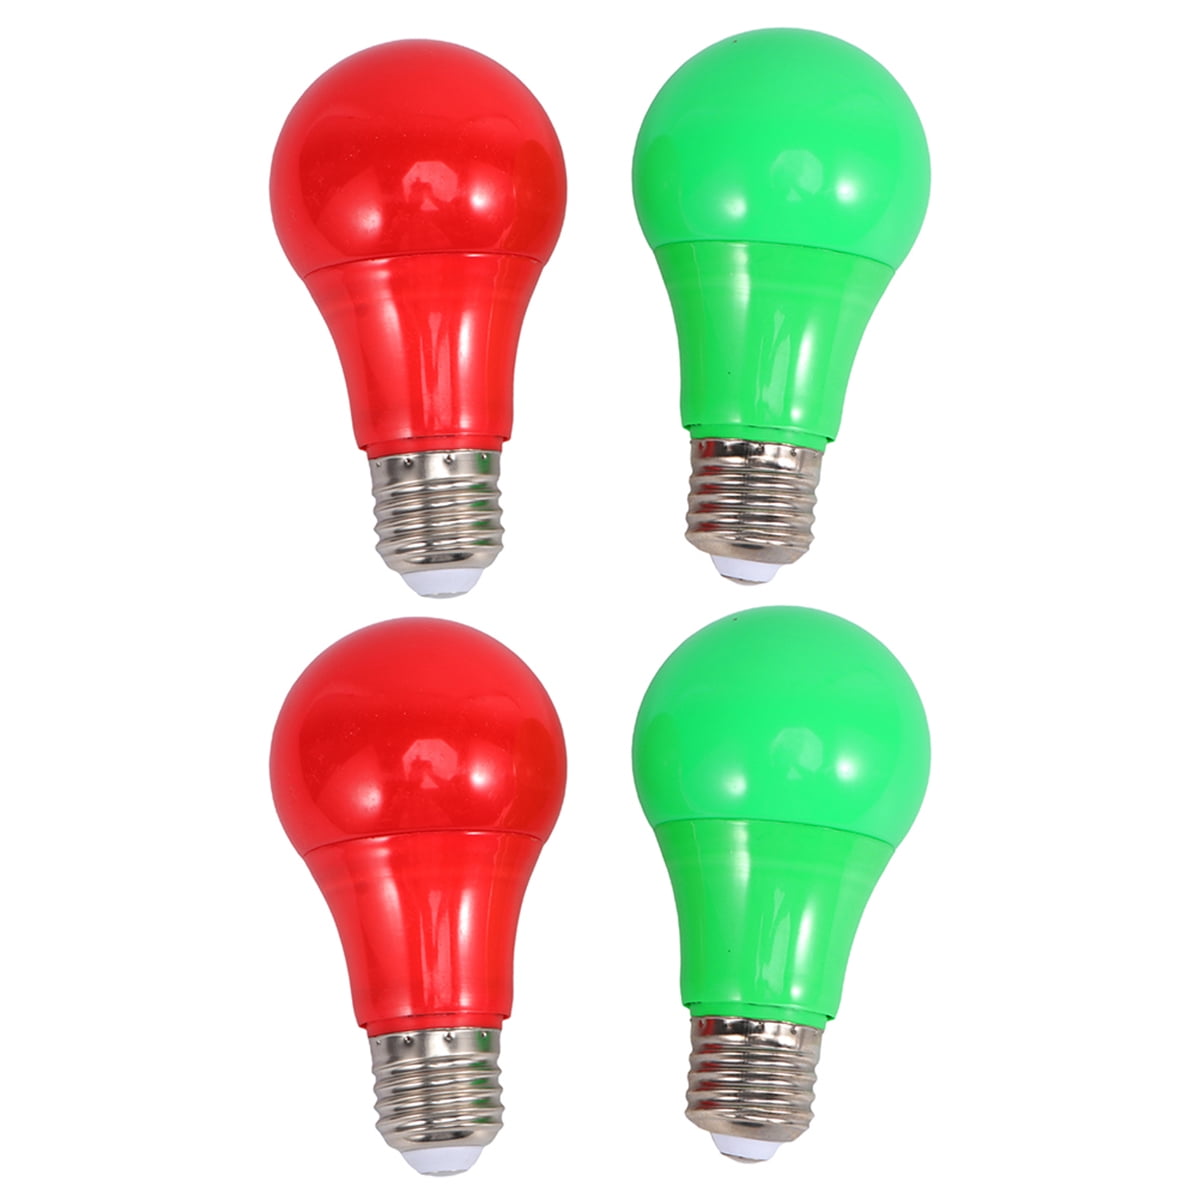 Ywoow Lamp Colorful Bulbs Colorful Bulbs E27 Energy Saving Led Bulb Color Incandescent Party Decoration Colorful Bulbs 